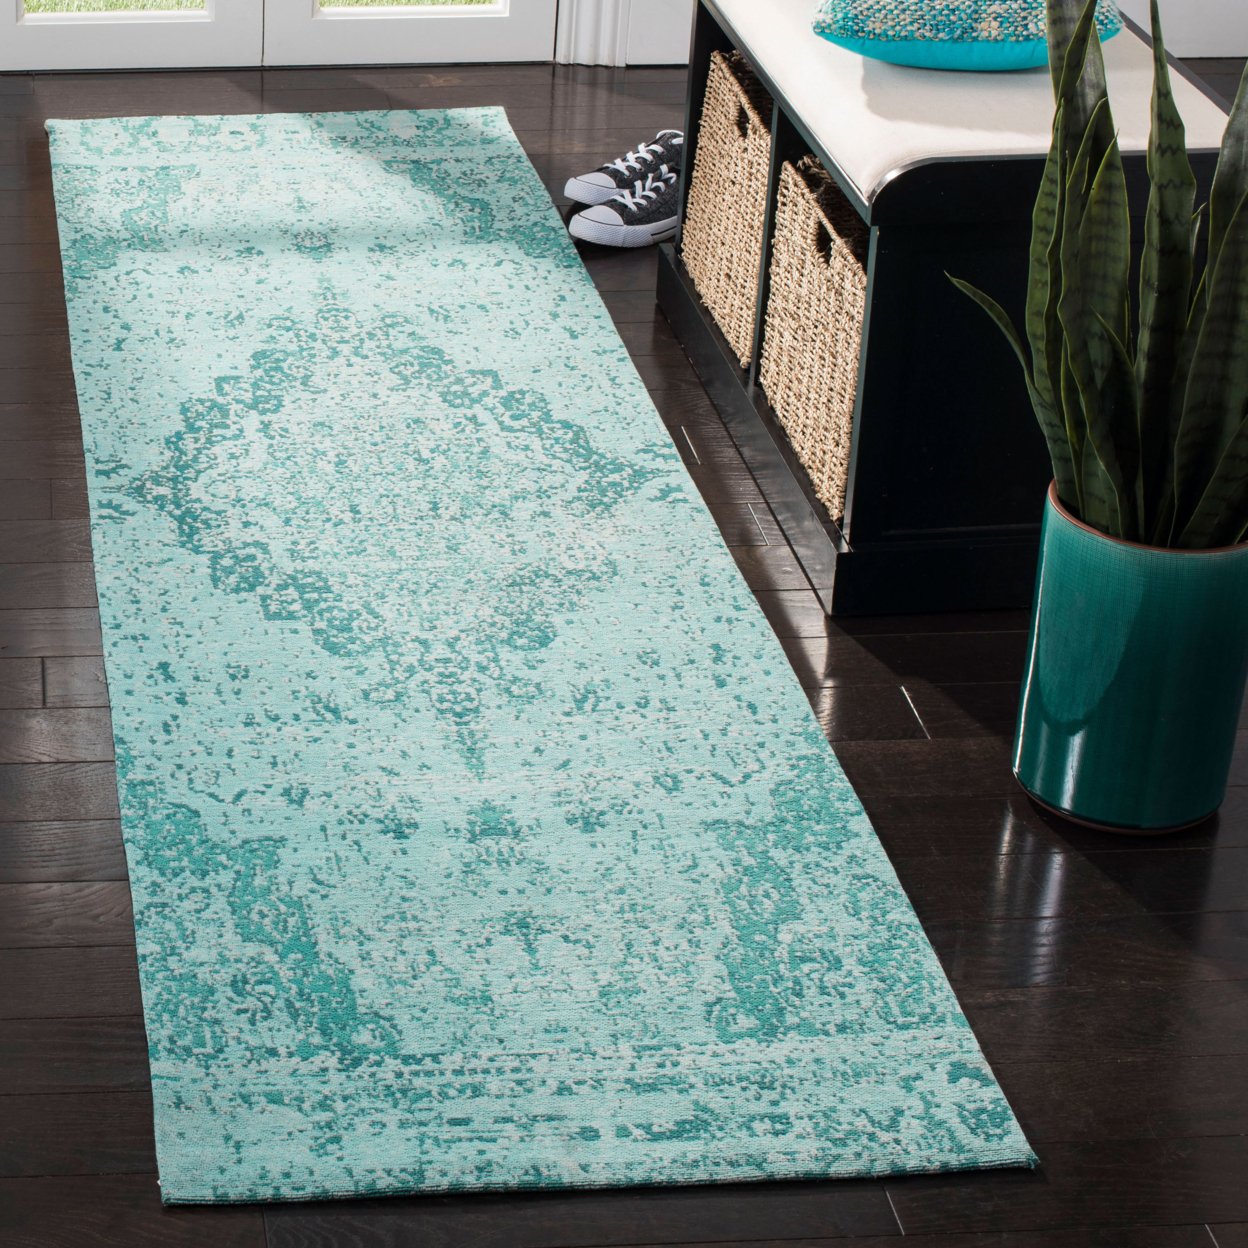 SAFAVIEH Classic Vintage Collection CLV110K Teal Rug - 4' X 6'